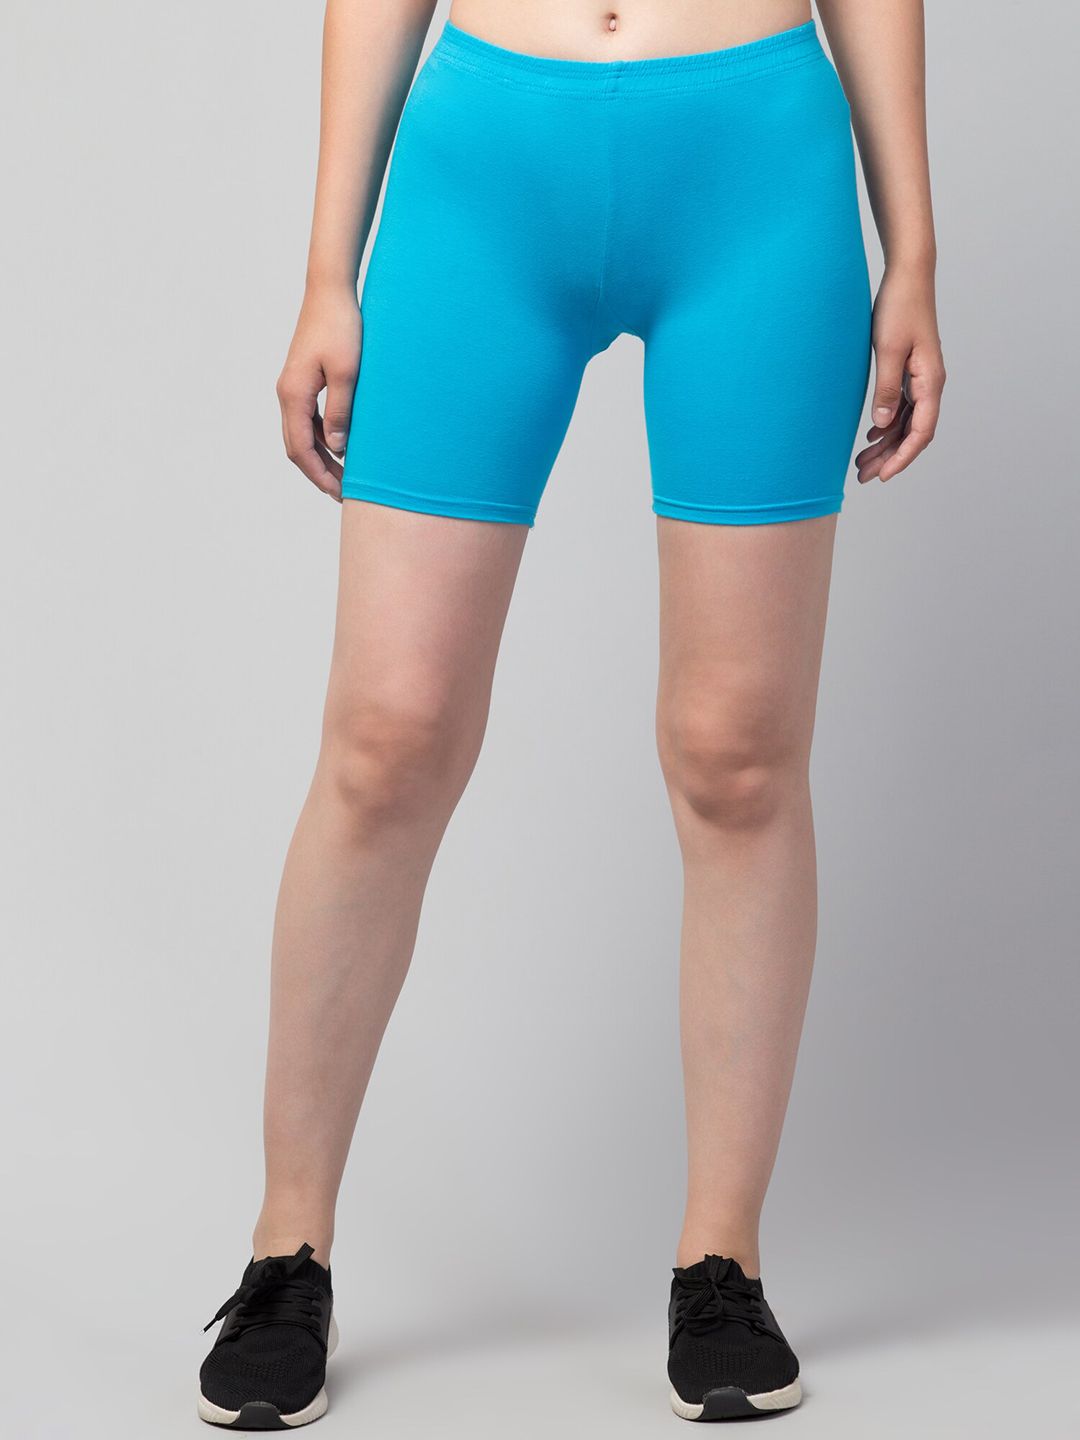 Apraa & Parma Women Slim Fit Sports Shorts Price in India